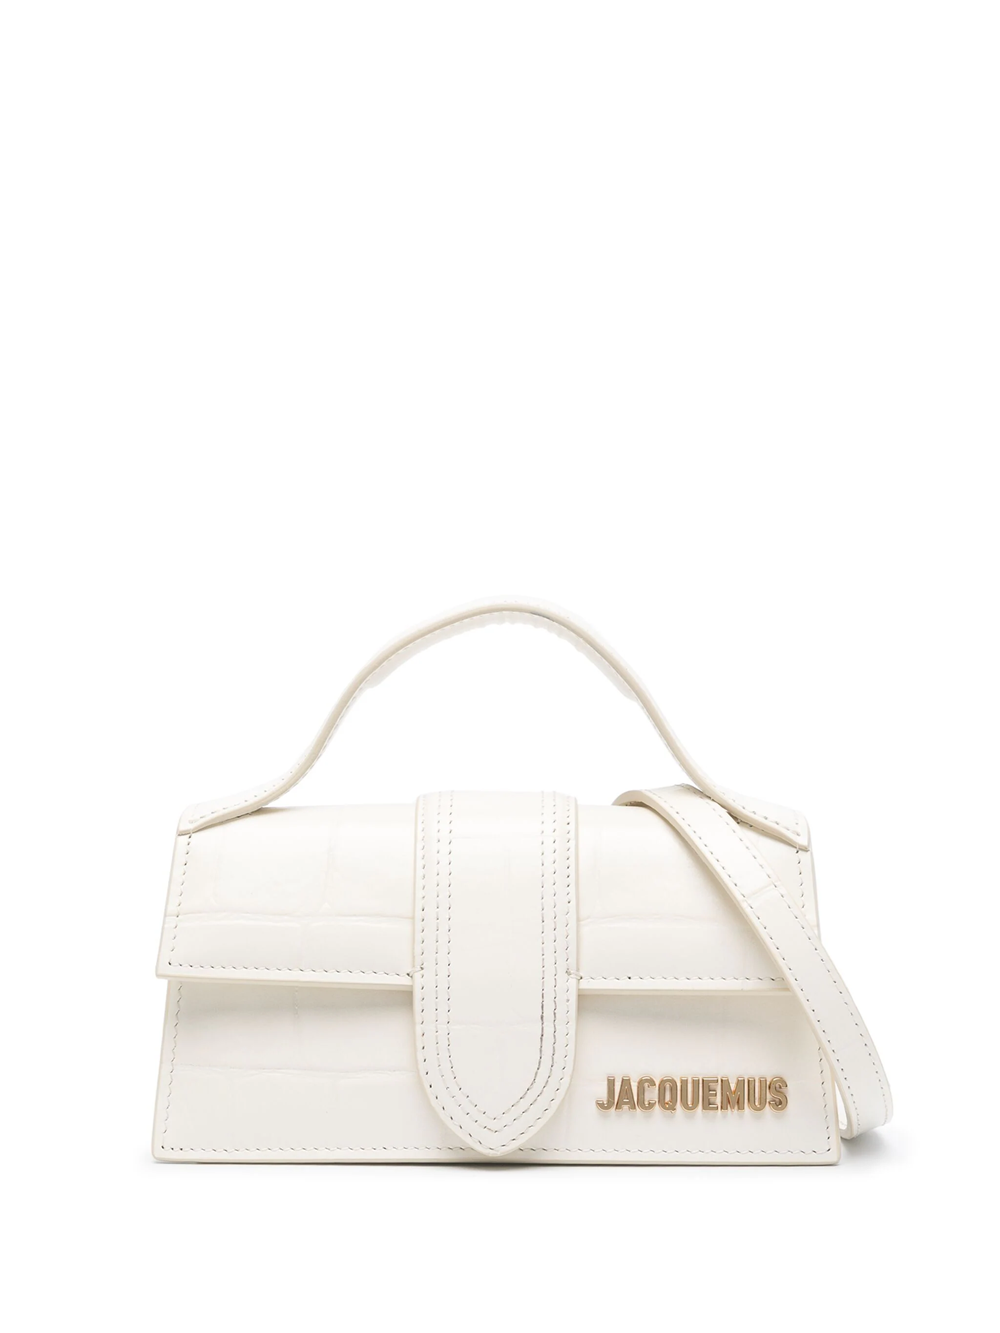 Jacquemus Le Bambino Mini Leather Bag In Ivory